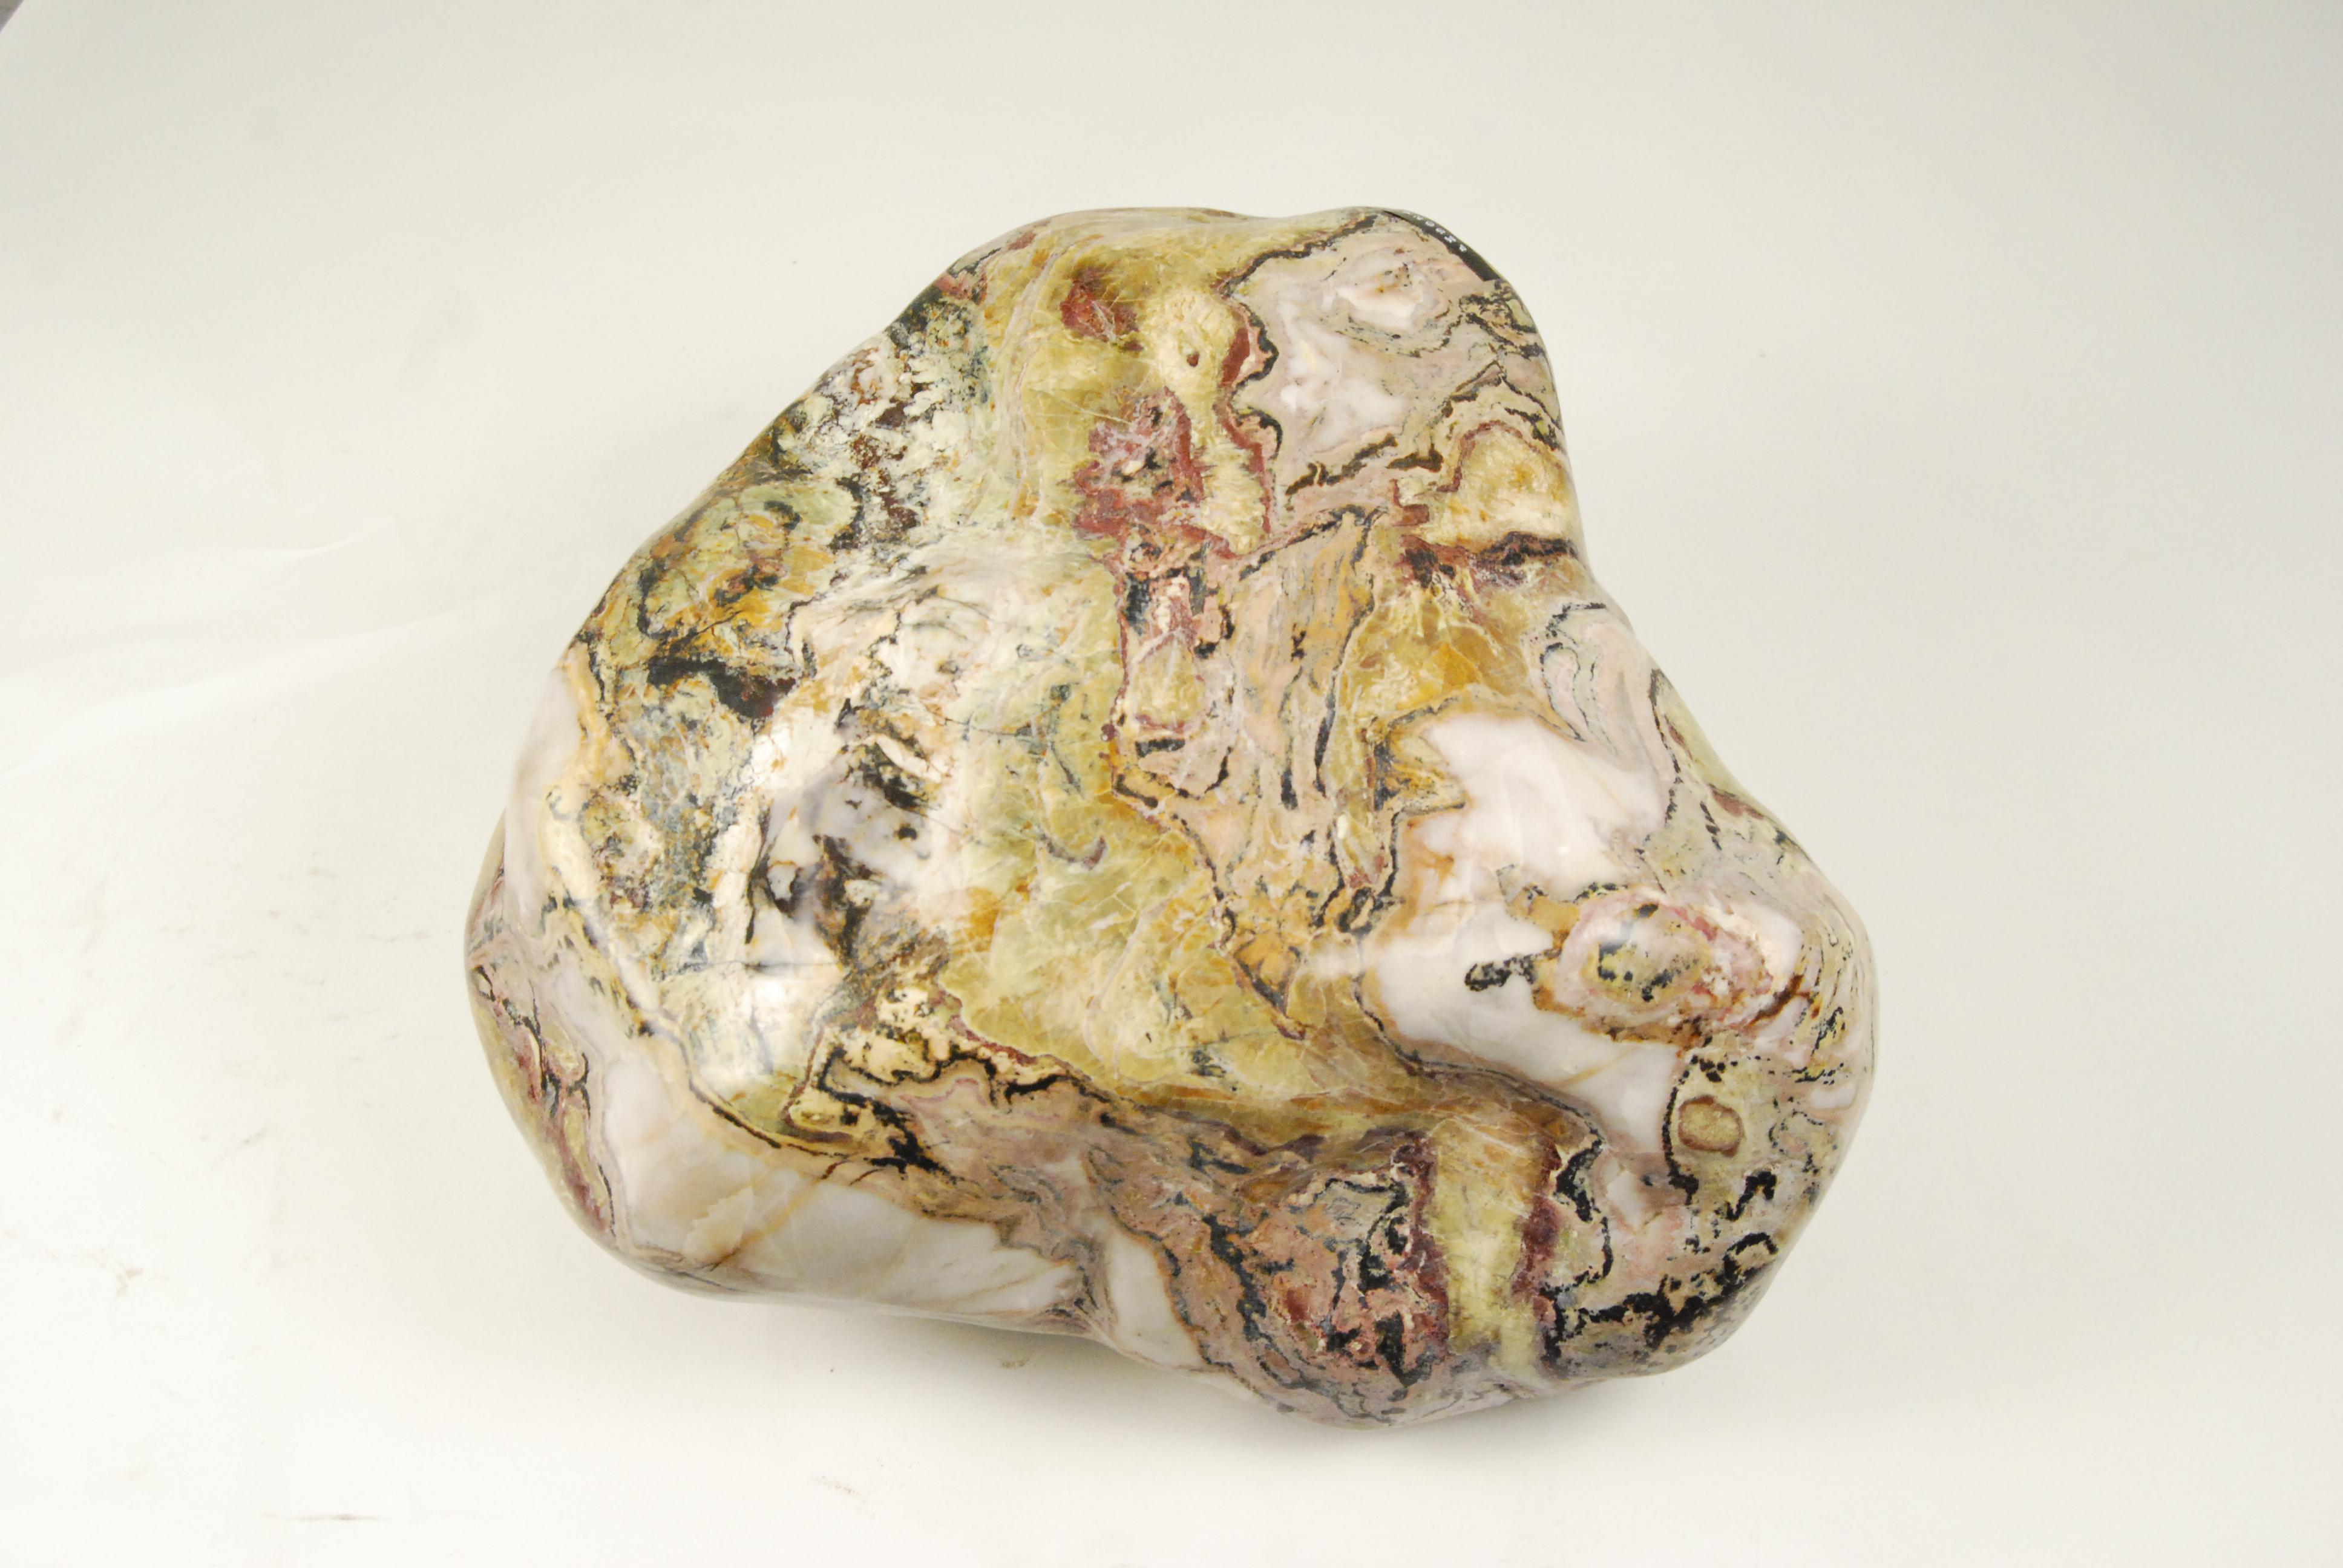 Cloaked in swirling colors and an undeniable sense of depth, scholars' rocks such as these were collected by ancient Chinese artists to inspire creativity. With its natural juxtaposition of dark and light, this stone from Jiangsu province is often